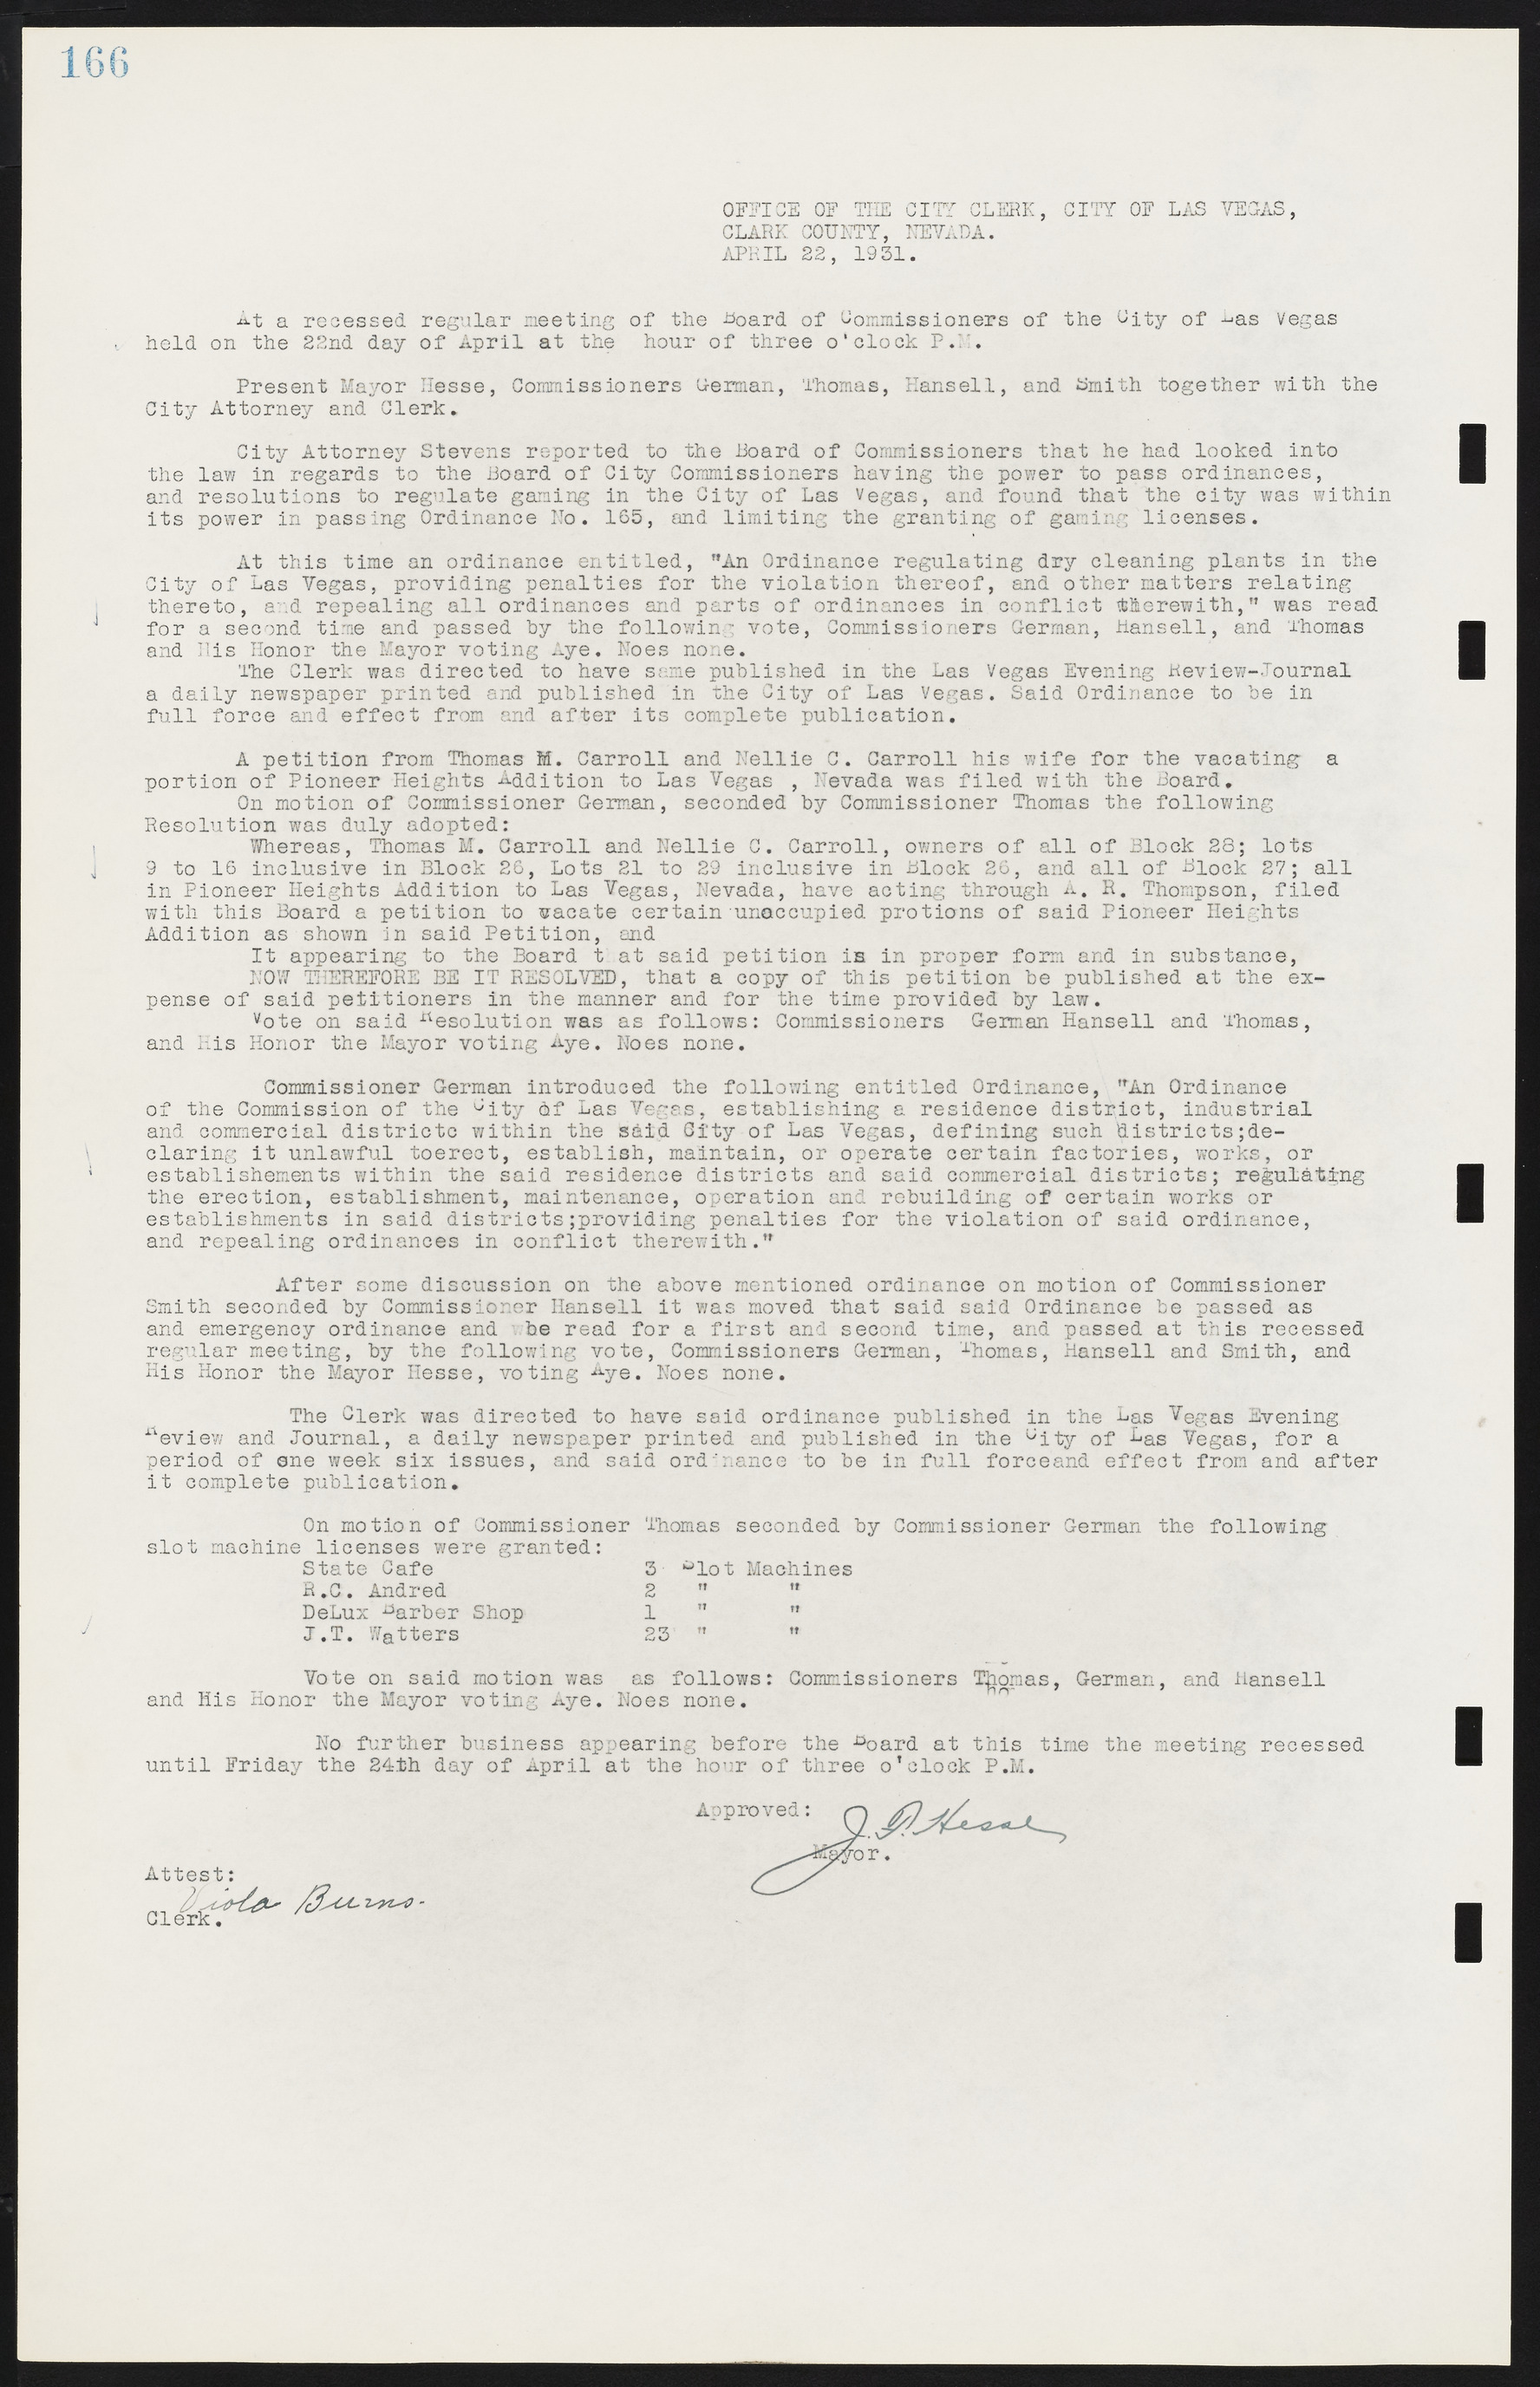 Las Vegas City Commission Minutes, May 14, 1929 to February 11, 1937, lvc000003-172